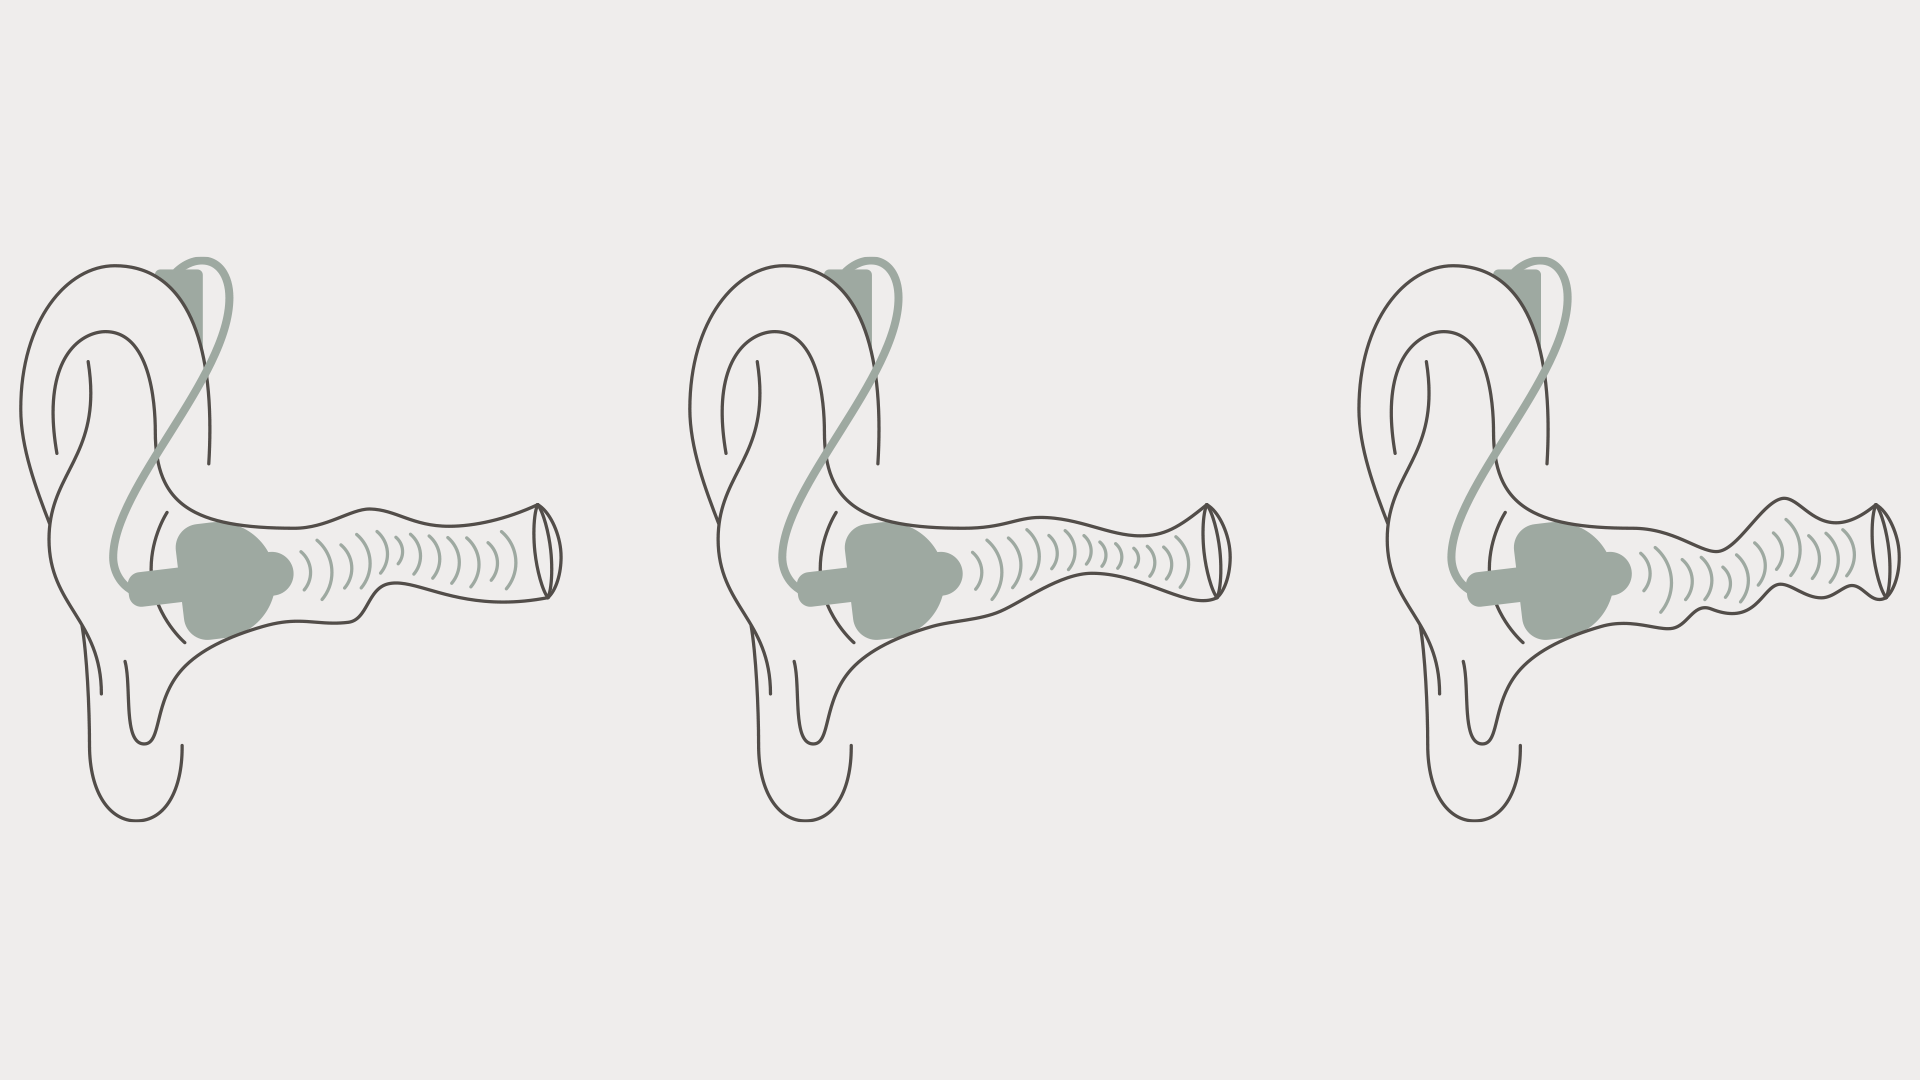 Visualization of how Widex hearing aid tips fit in different ear canals